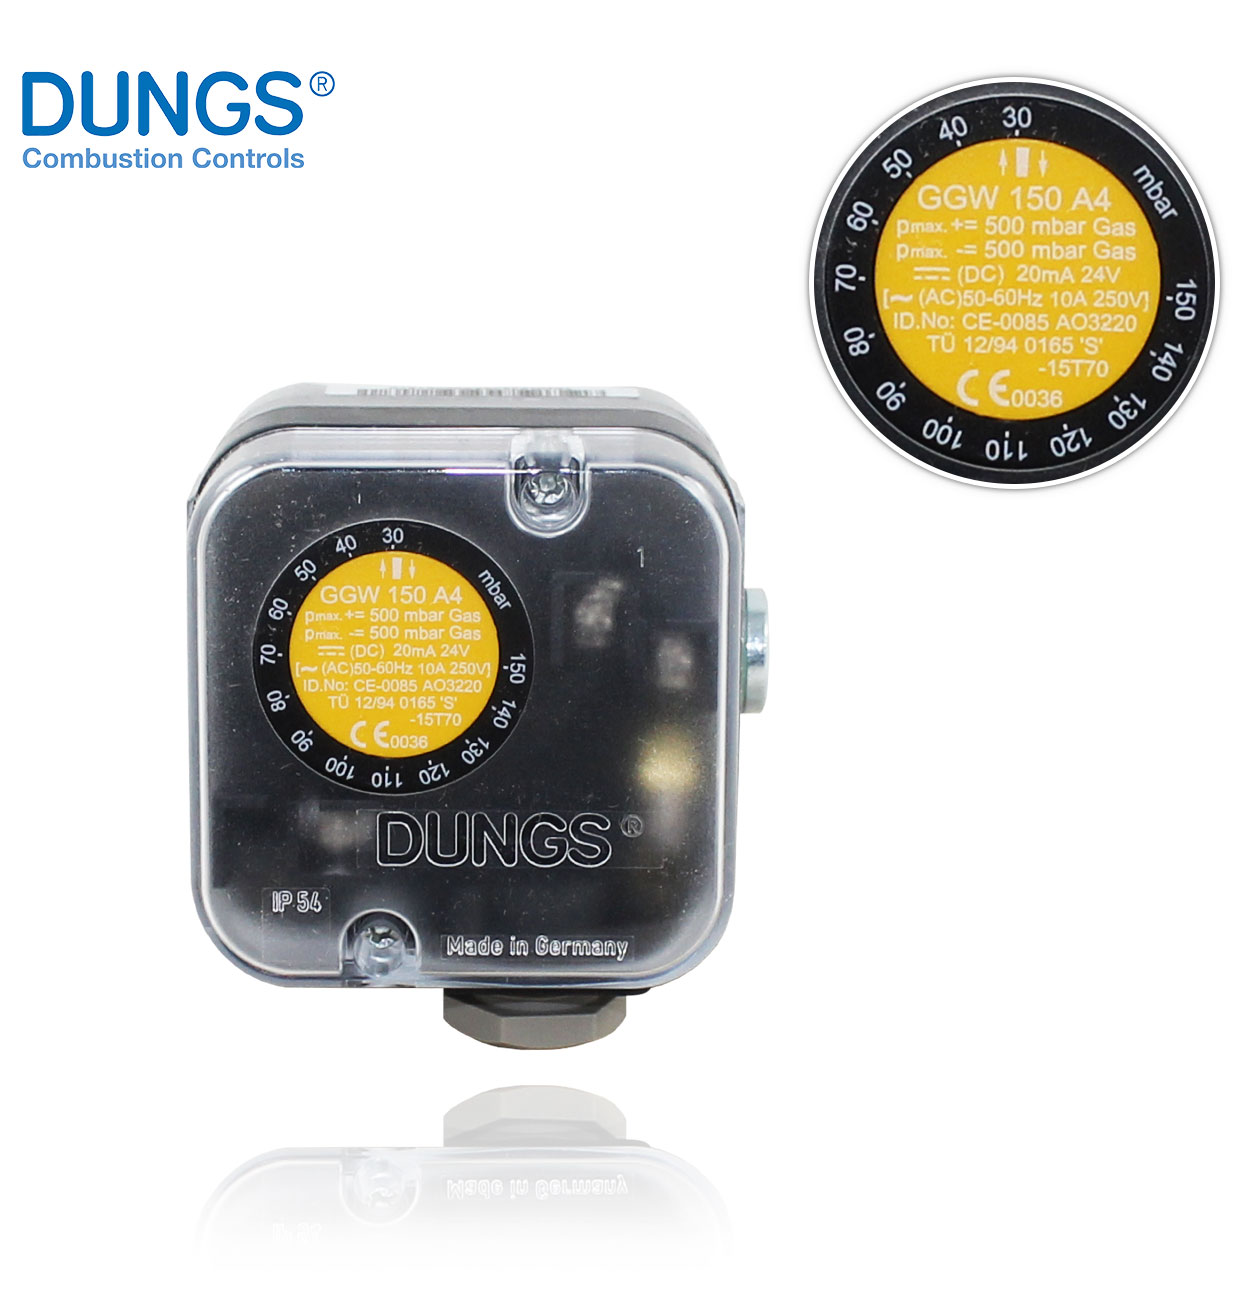 GGW 150 A4 30 A 150mbar. FOR DUNGS 248295 GAS AND/OR AIR DIFFERENTIAL PRESSURE SWITCH